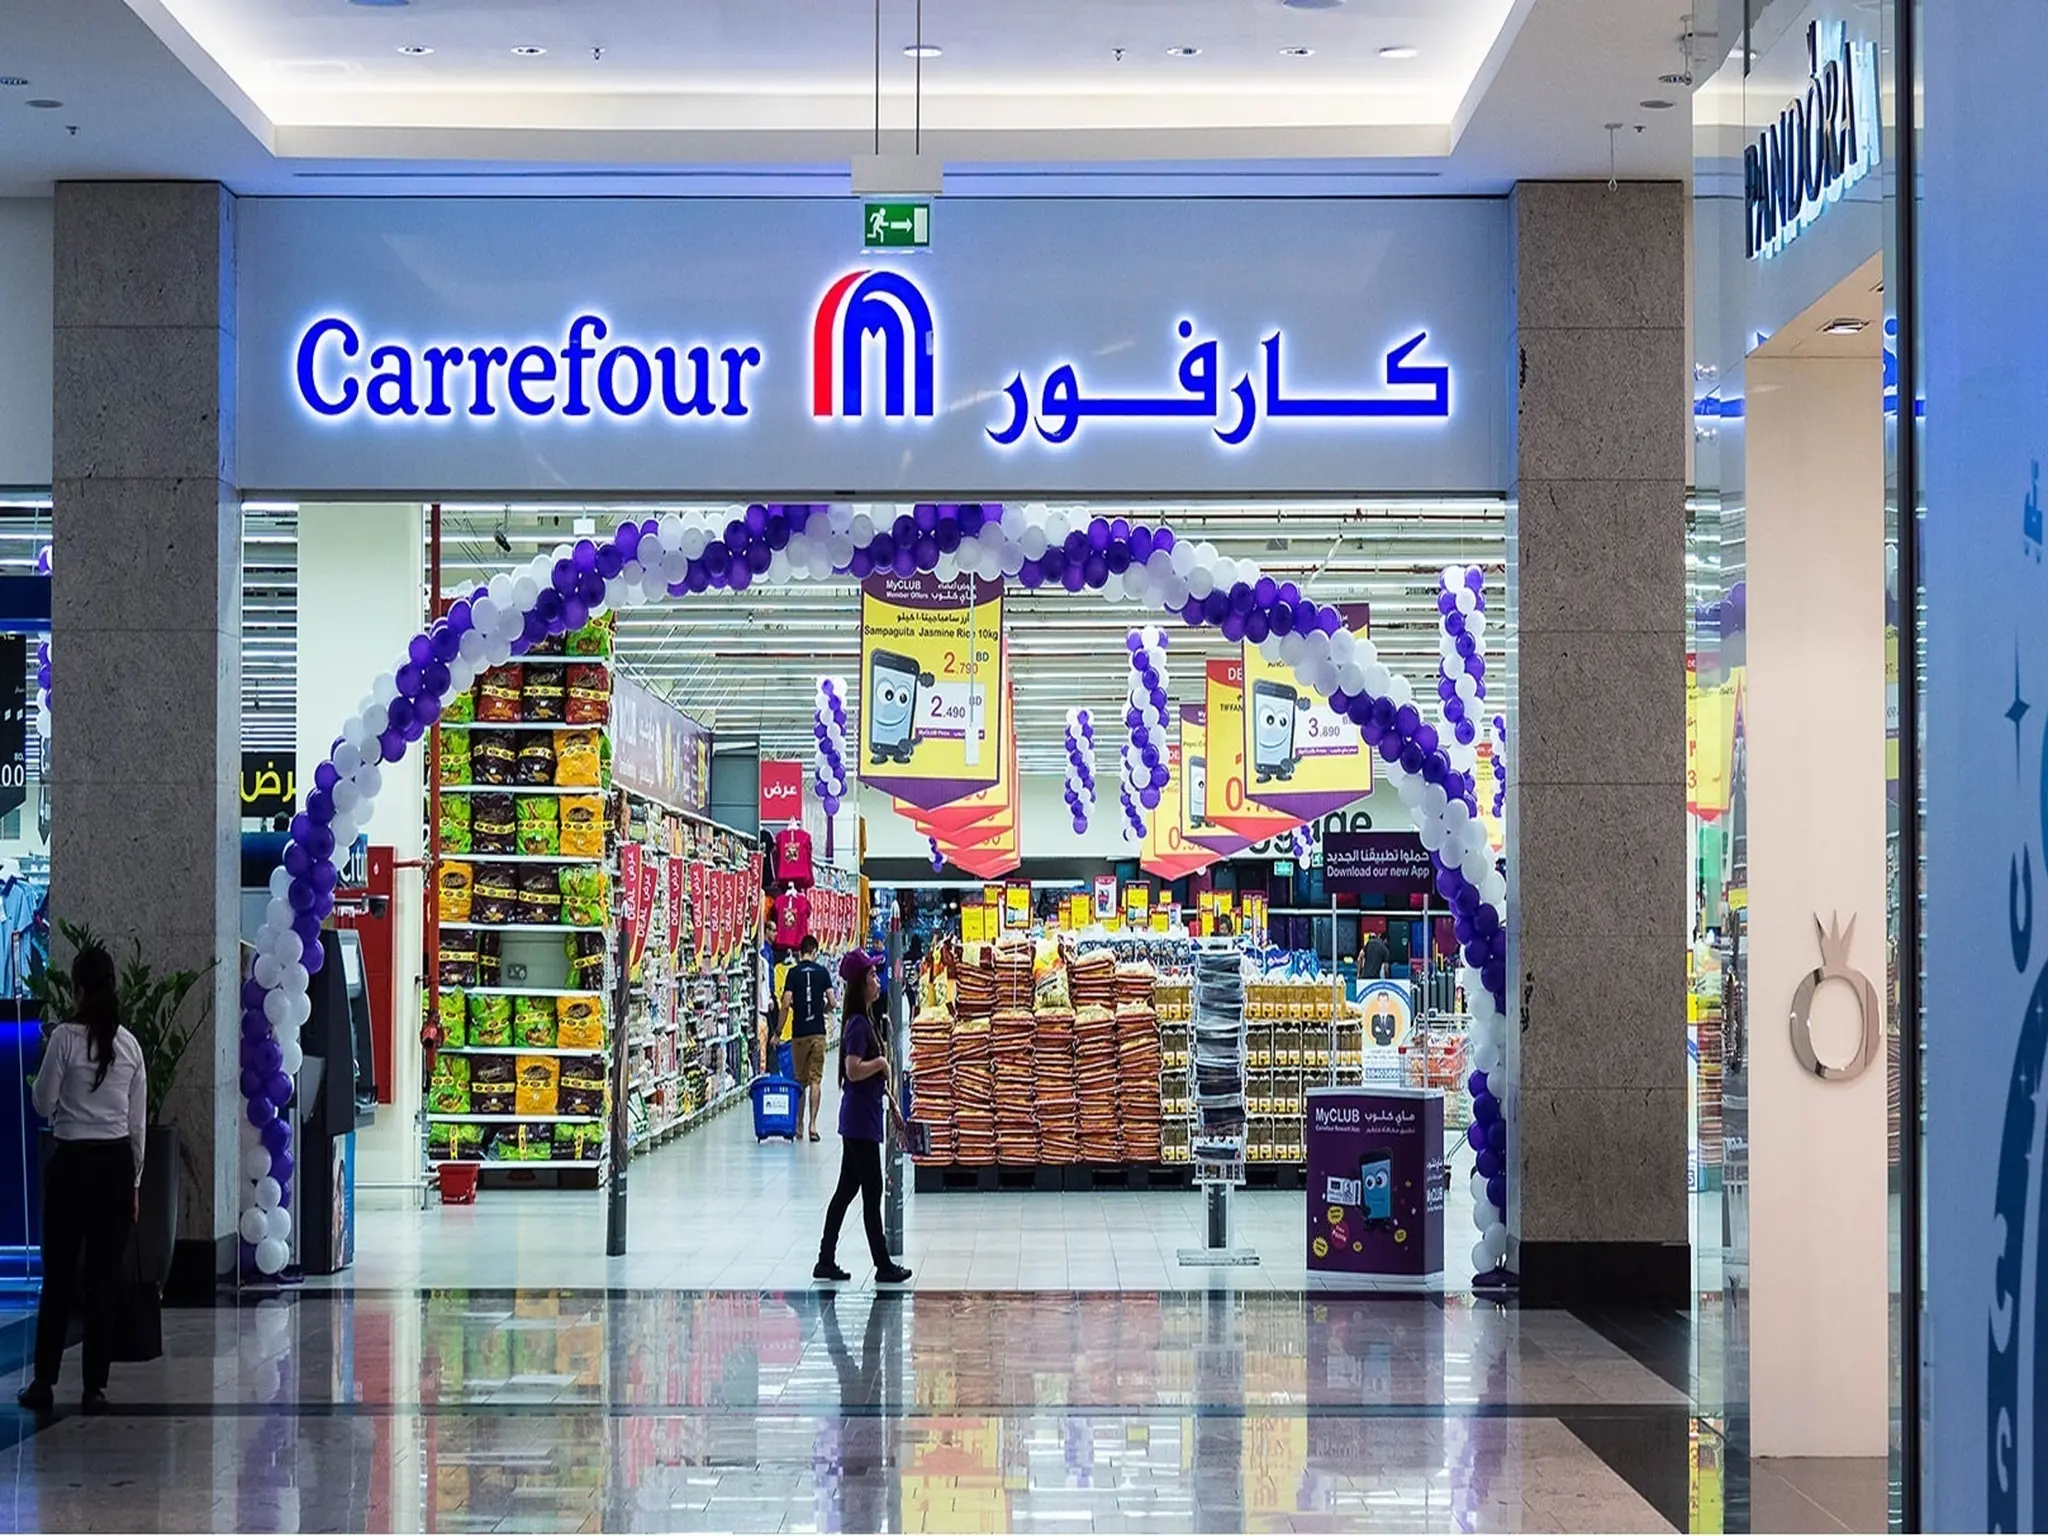 40% discounts in Carrefour UAE on the occasion of Eid